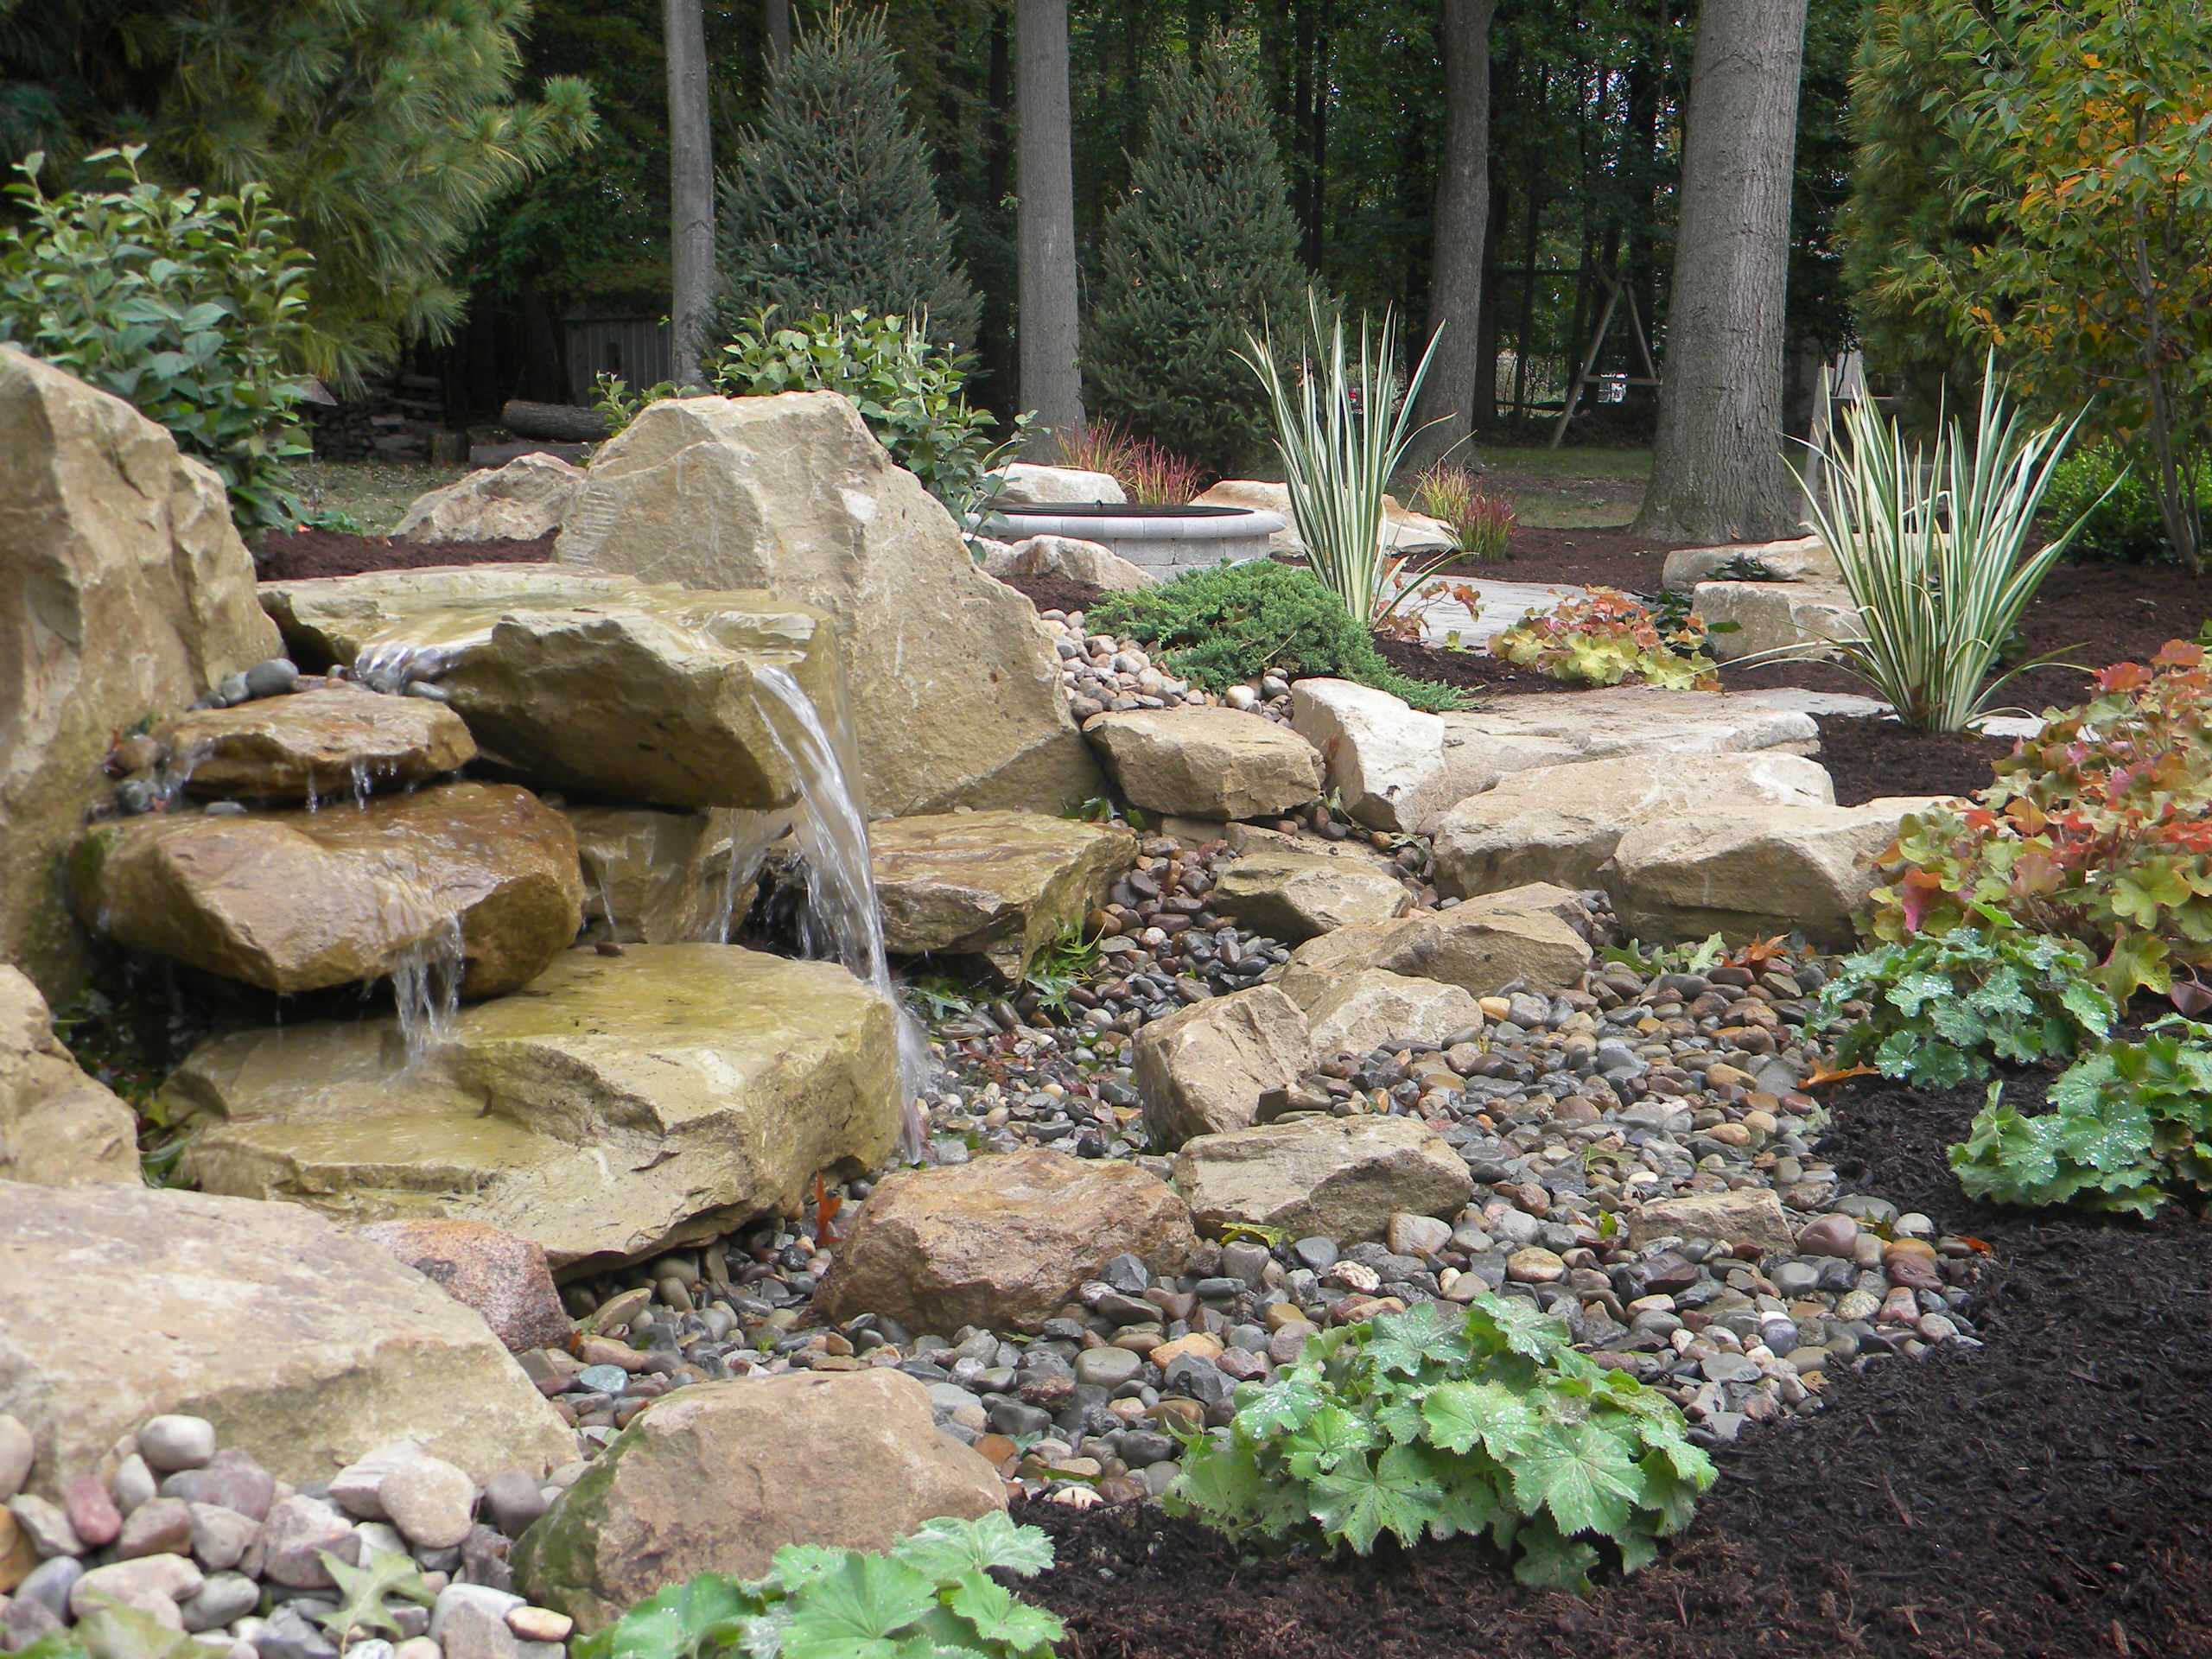 Patio,water feature,landscaping